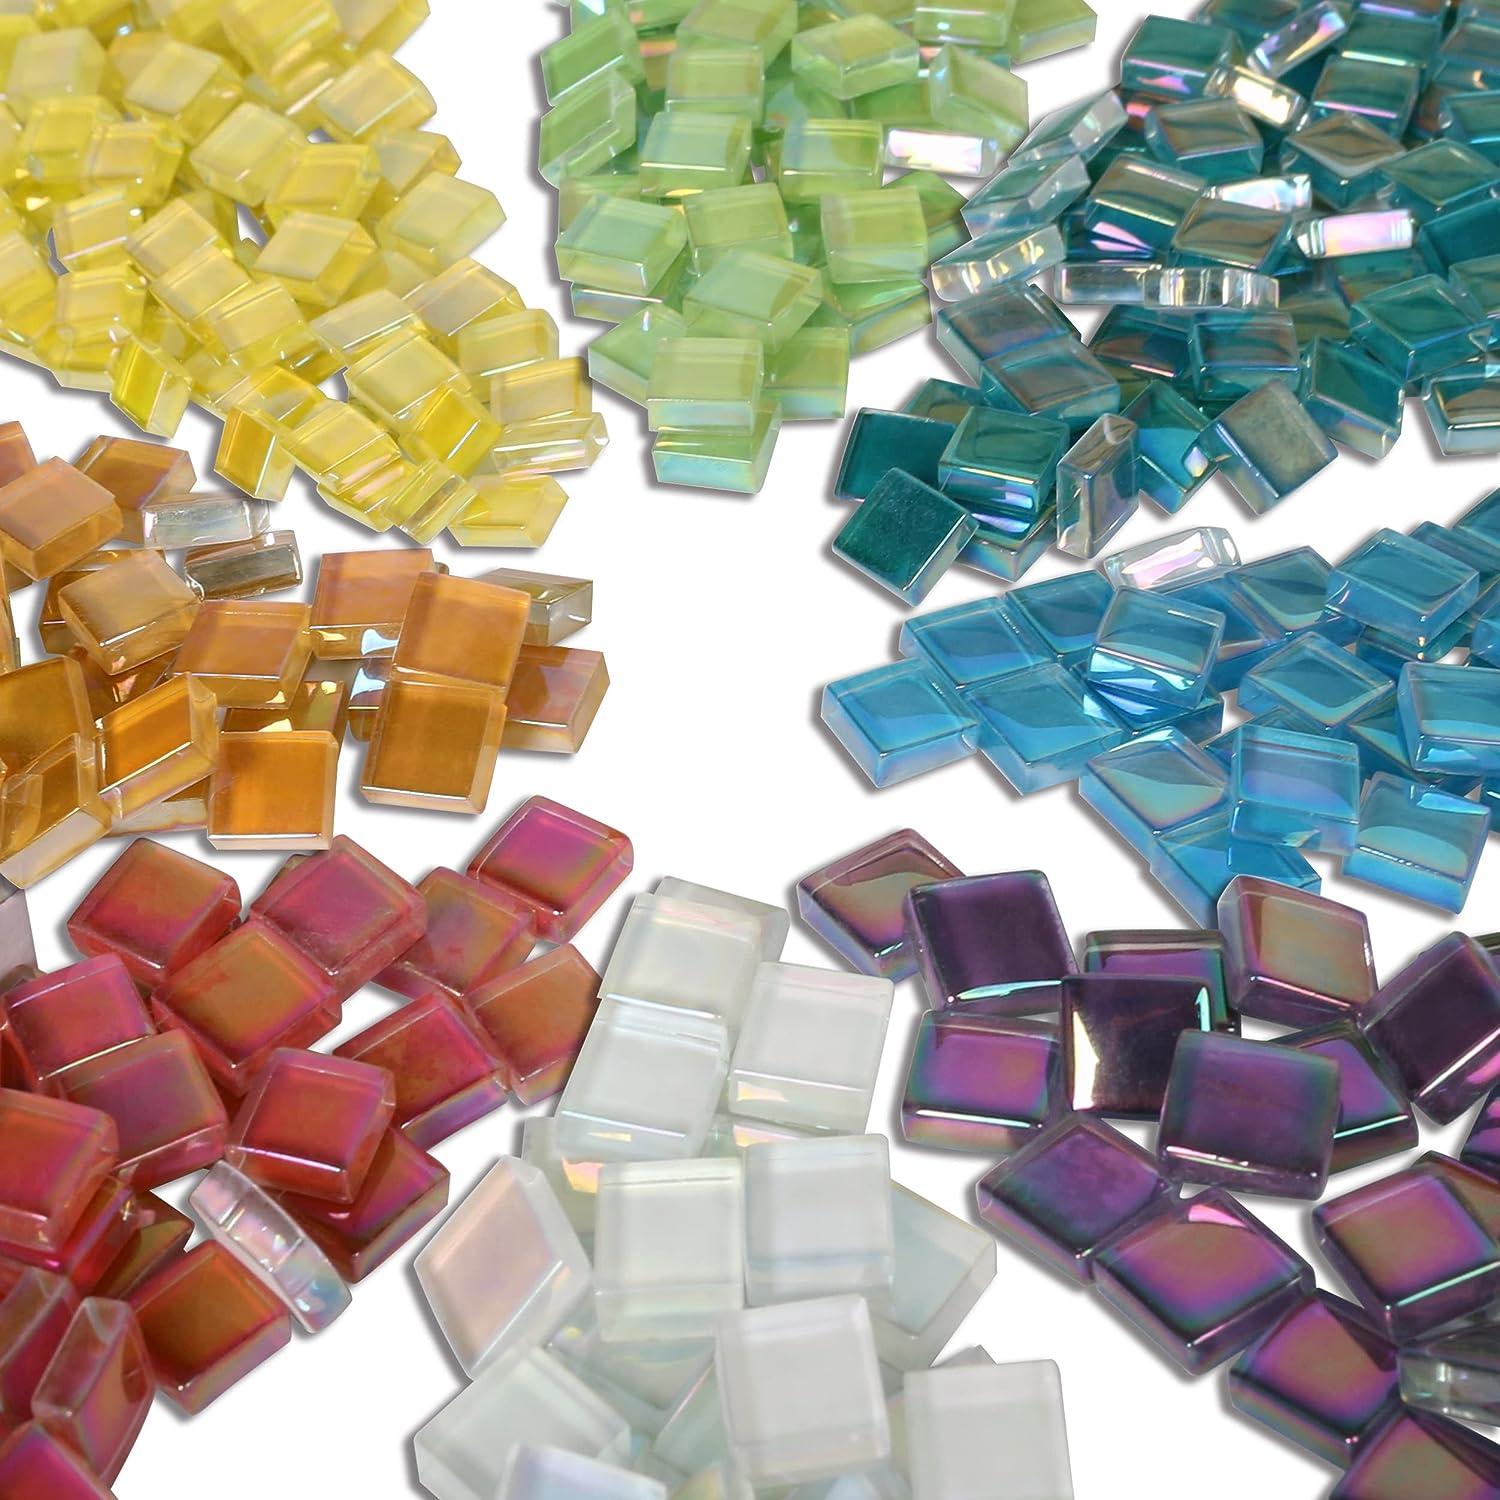 1.5lb Mosaic Tiles Assorted Iridescent Crystal Mosaic Tiles for Crafts  Glass Mosaic Pieces Set with Box 680g DIY Picture Frames Handmade Jewelry  Art Decoration Gifts (Multi Colors Set)